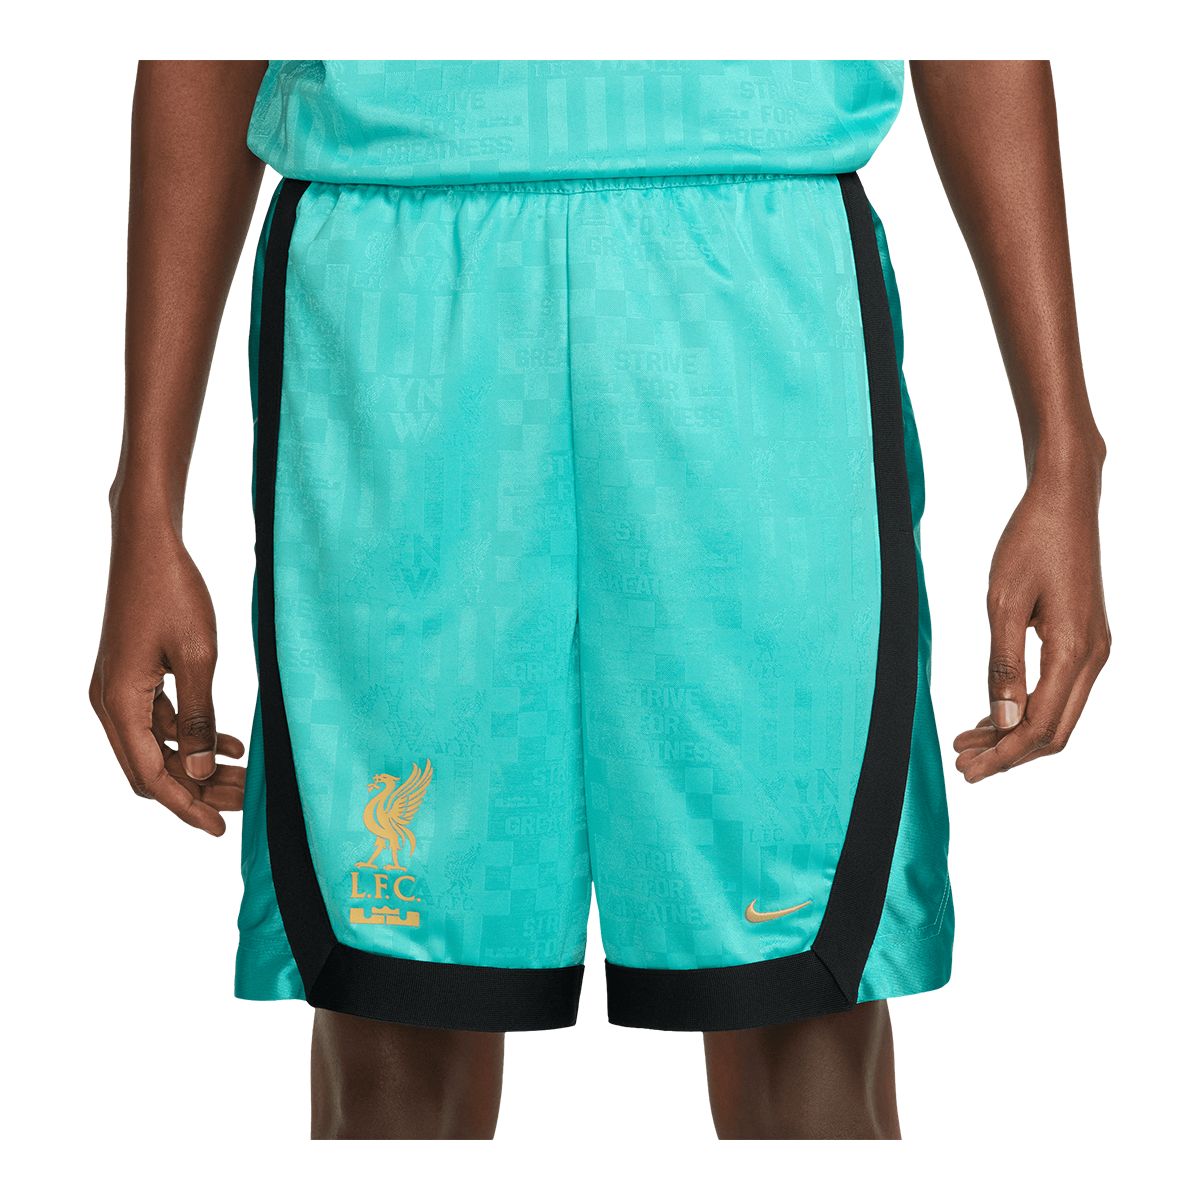 Image of Nike Men's LeBron James Liverpool FC DNA 8 Inch Shorts